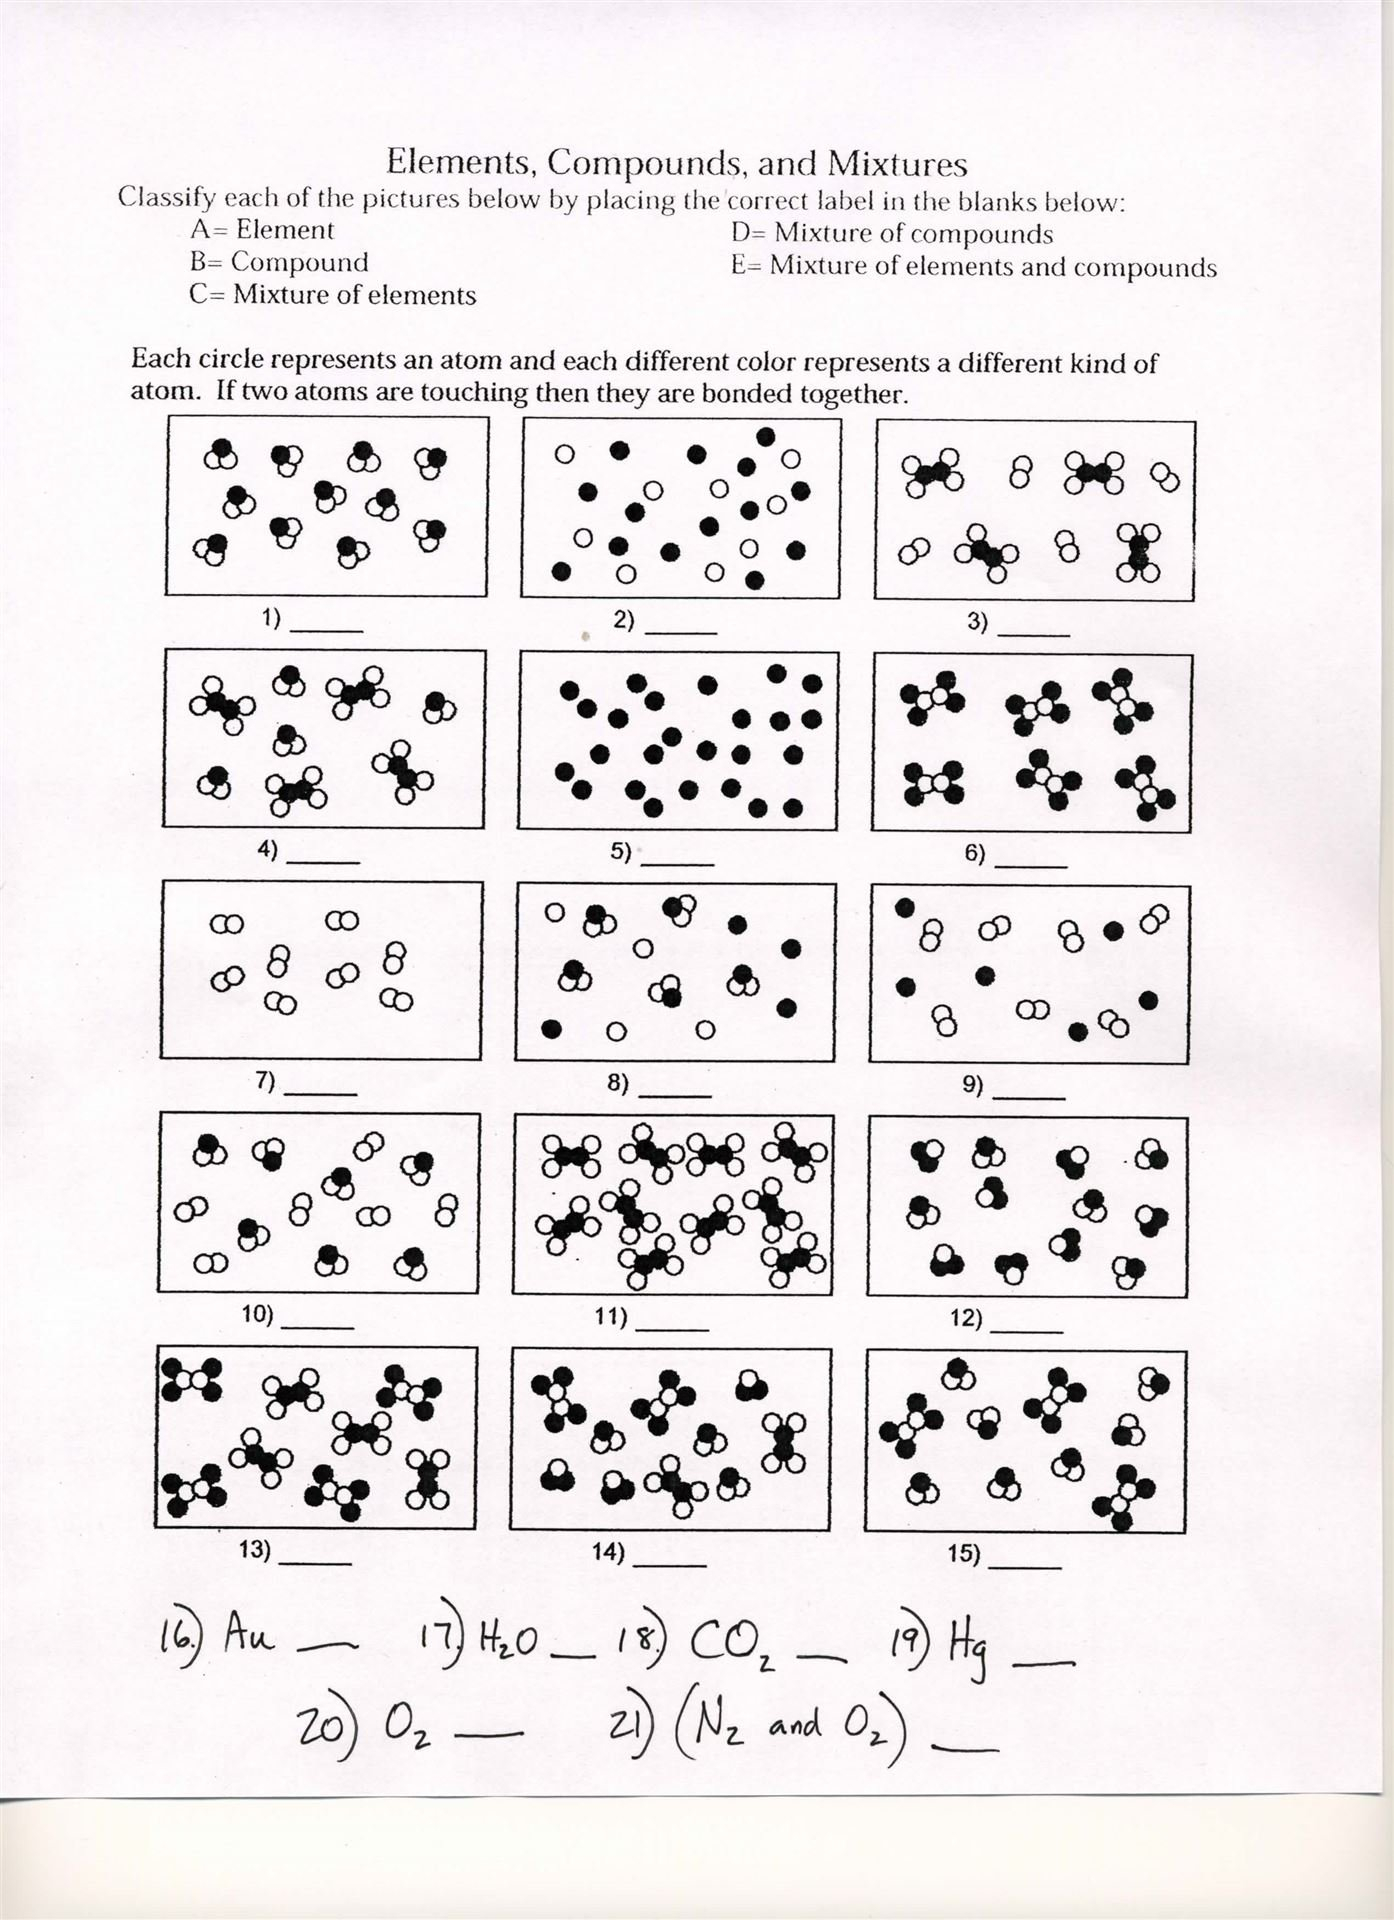 Michael Feeback  Scott County High School Together With Elements Compounds And Mixtures Worksheet Pdf